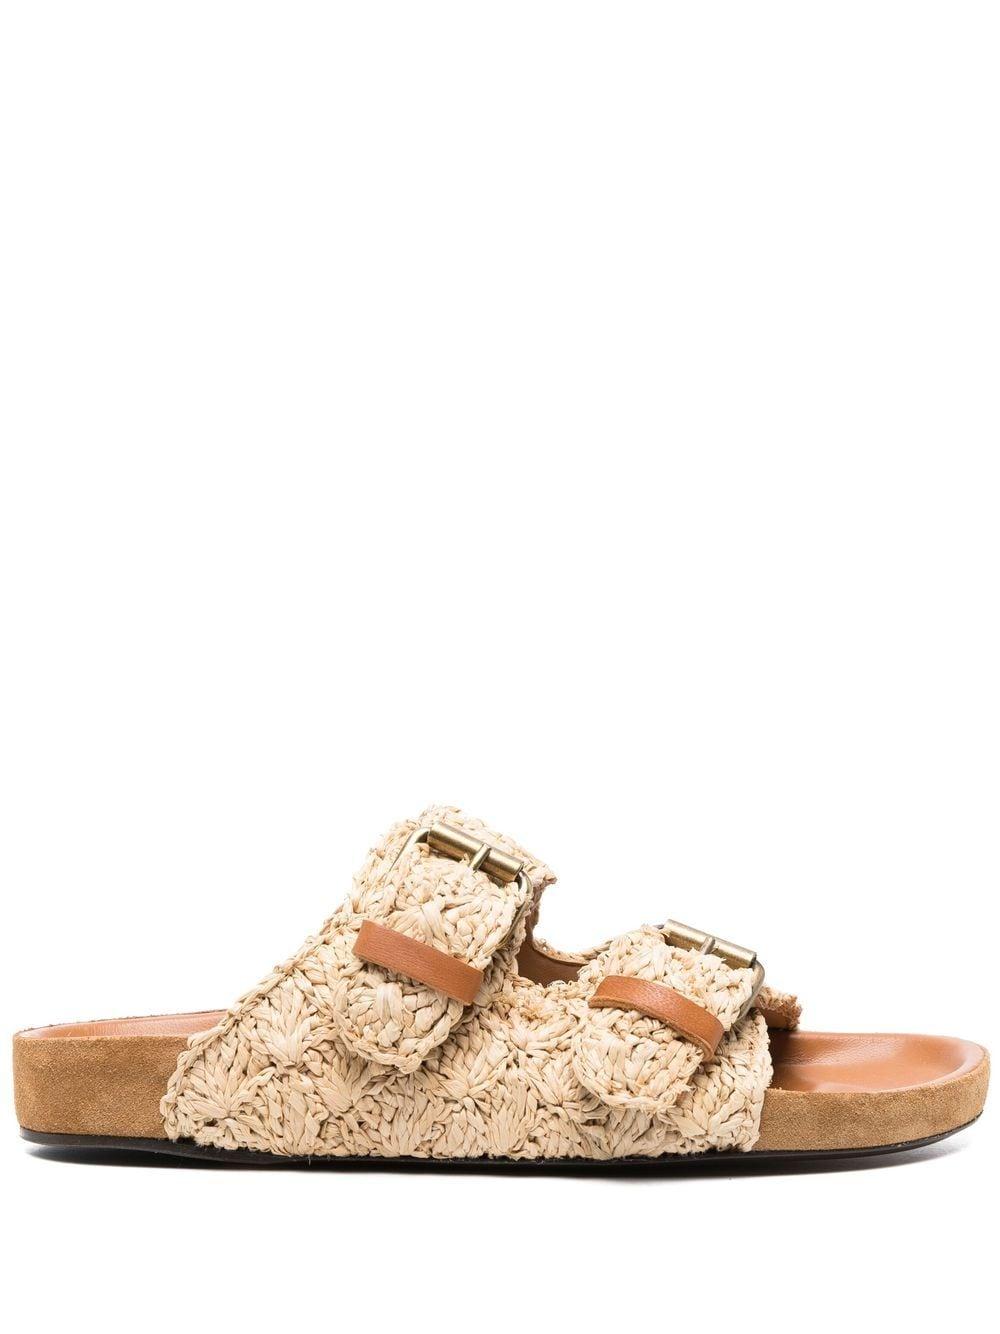 Isabel Arizona Double-buckle Sandals in Natural | Lyst Canada